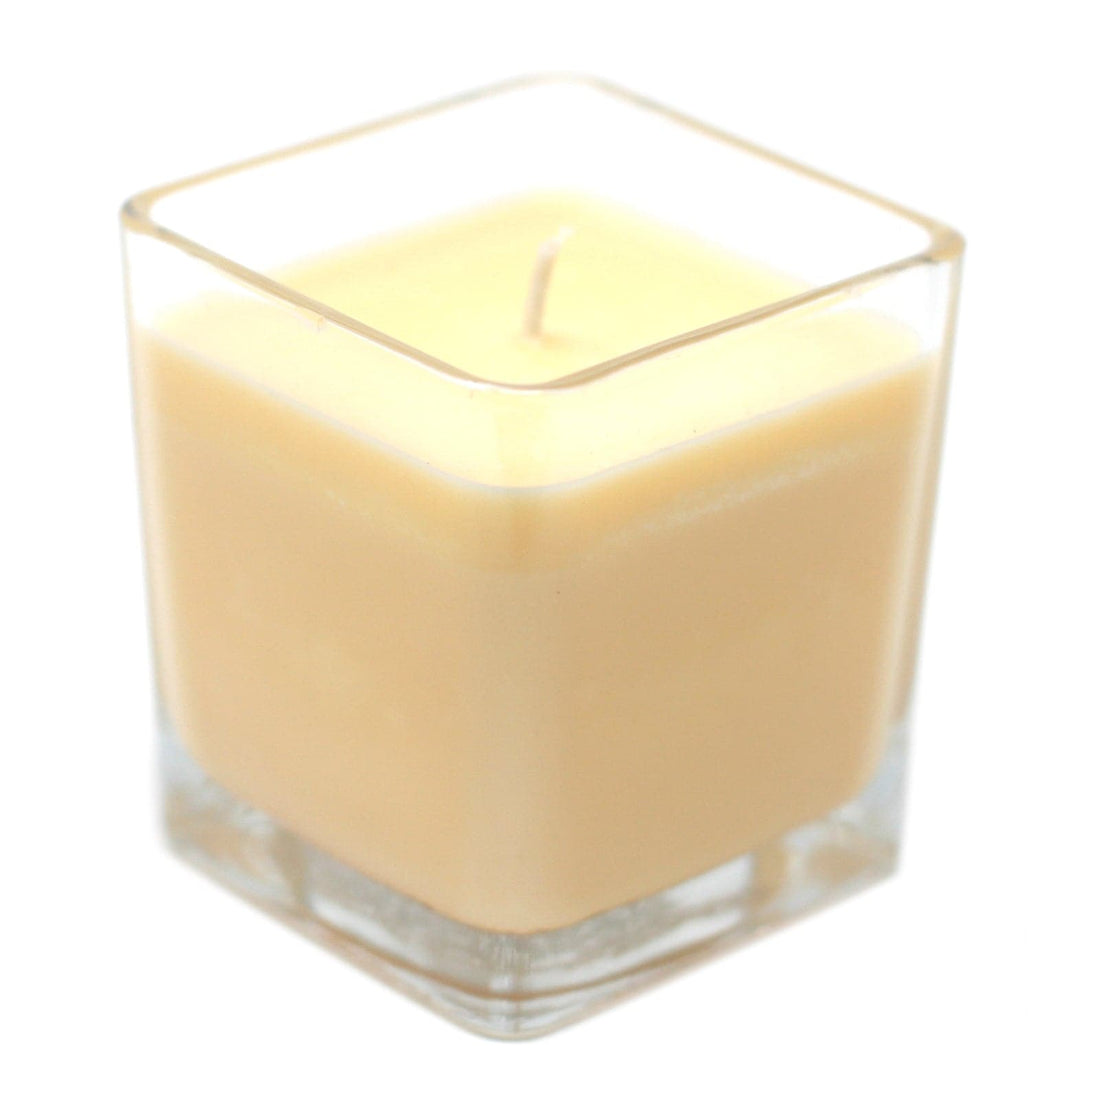 White Label Soy Wax Jar Candle - So Delicious - best price from Maltashopper.com WLSOYC-08